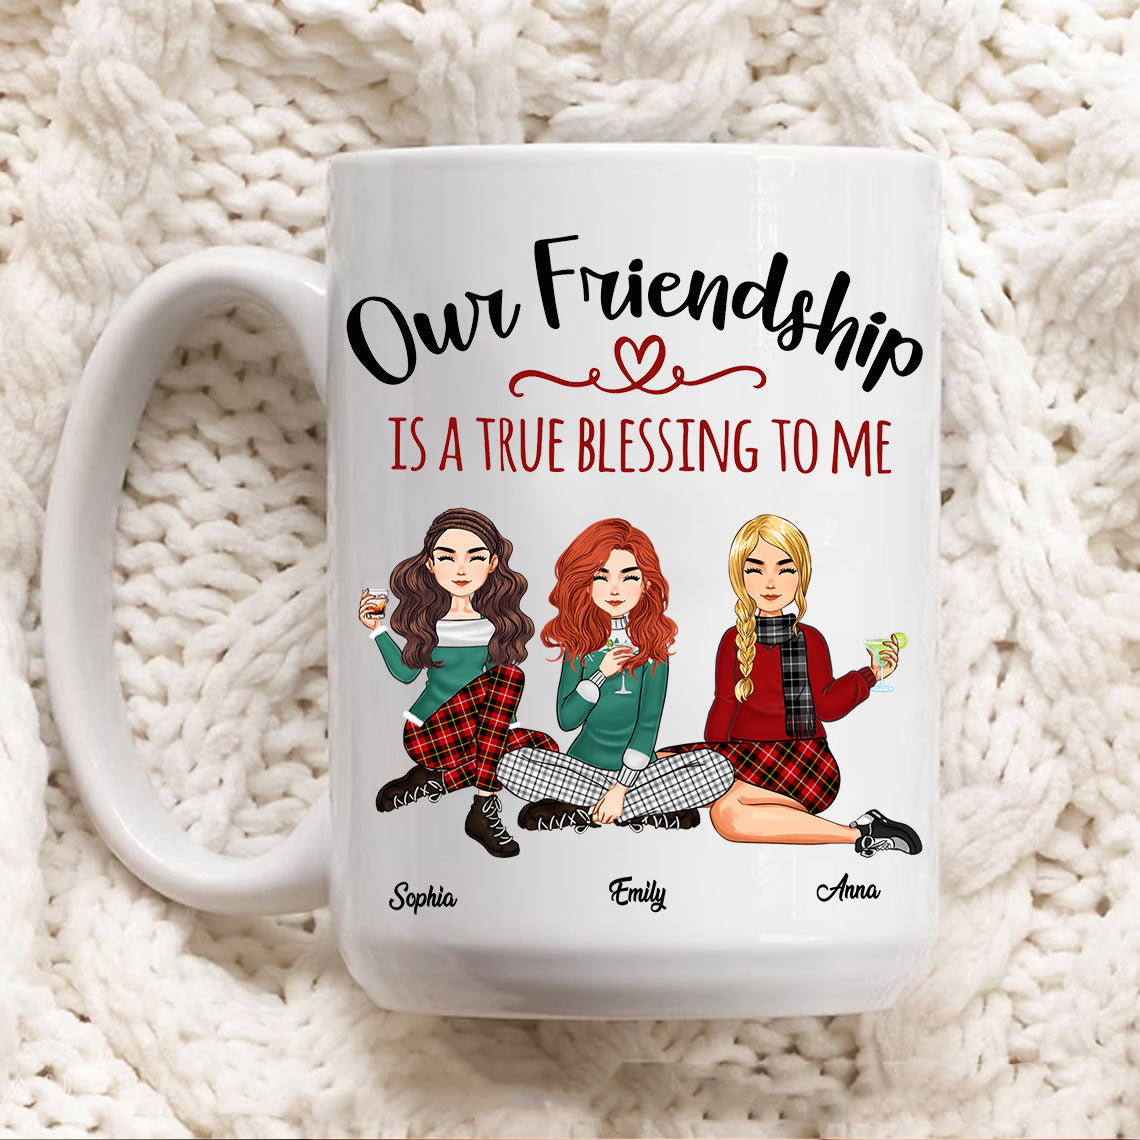 Our Friendship Is A True Blessing To Me - Custom Appearances And Names, Personalized White Mug, Gift For Her